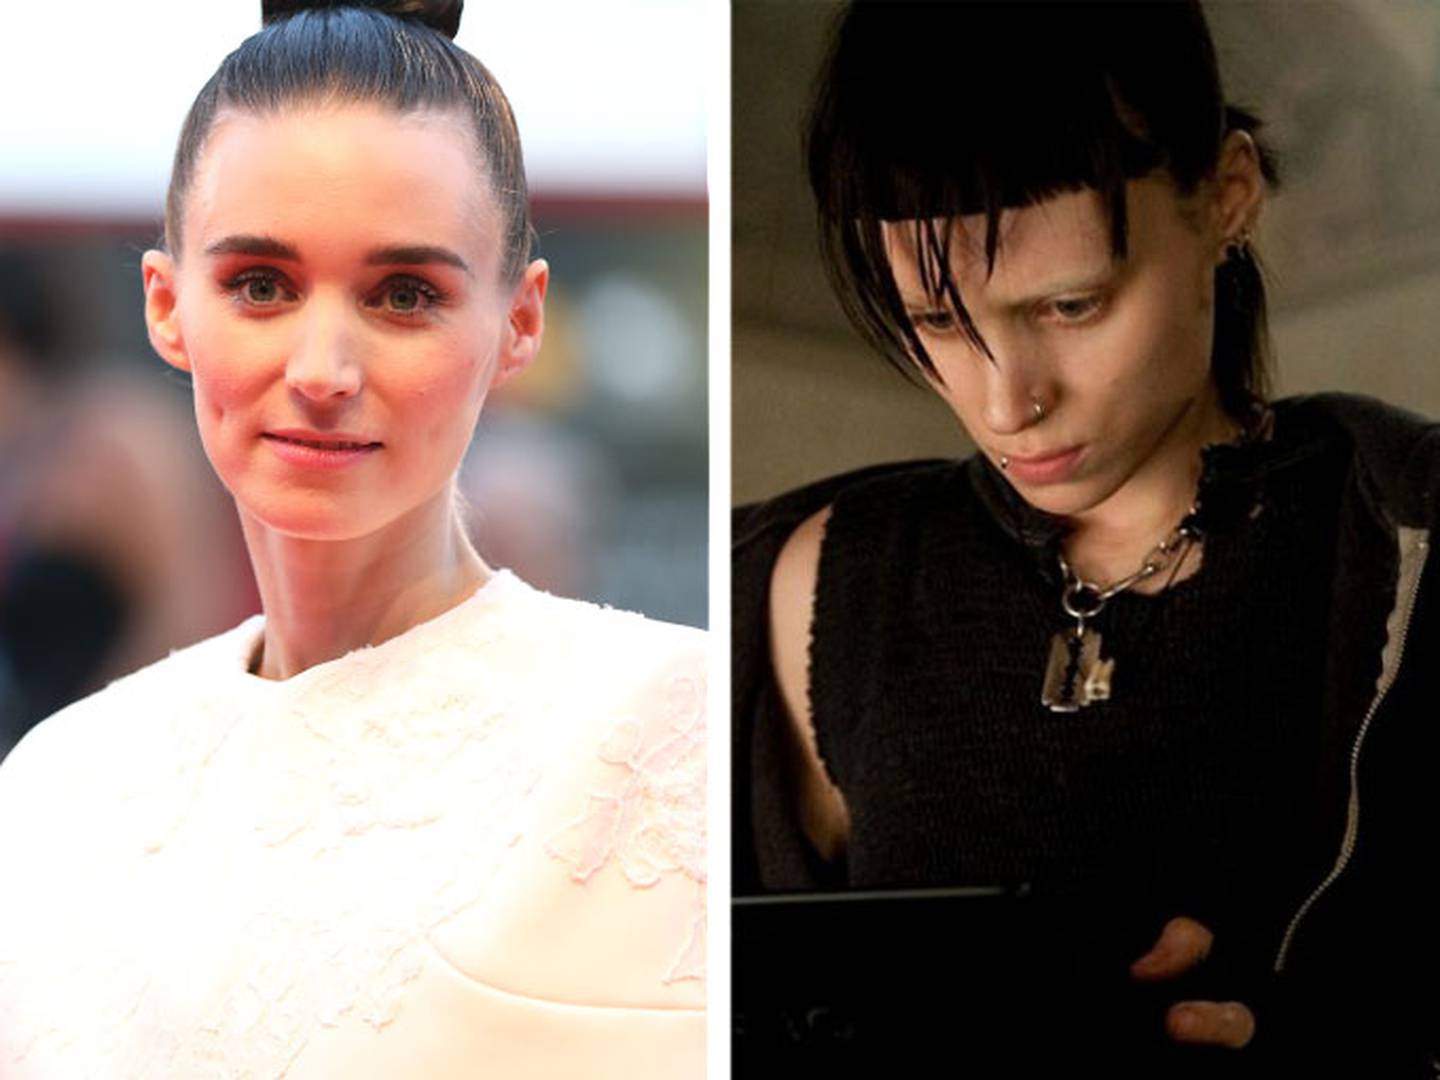 Rooney Mara in 'The Girl with the Dragon Tattoo'. Photos: Getty Images; 20th Century Studios